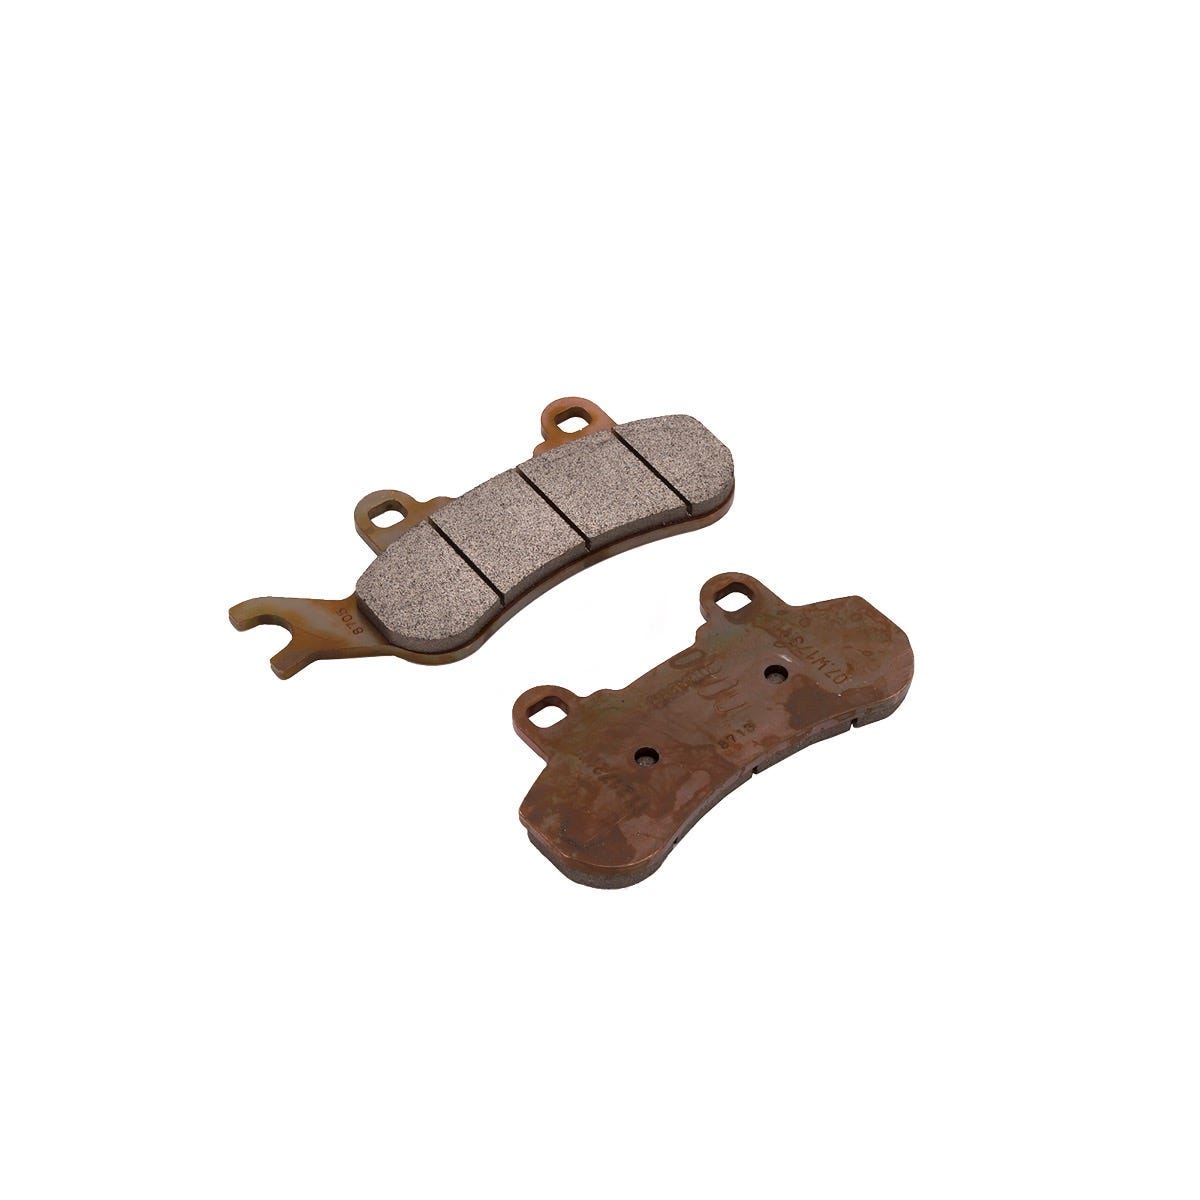 Can-am Metallic Brake Pad Kit - Front Right 715900380 - The Parts Lodge